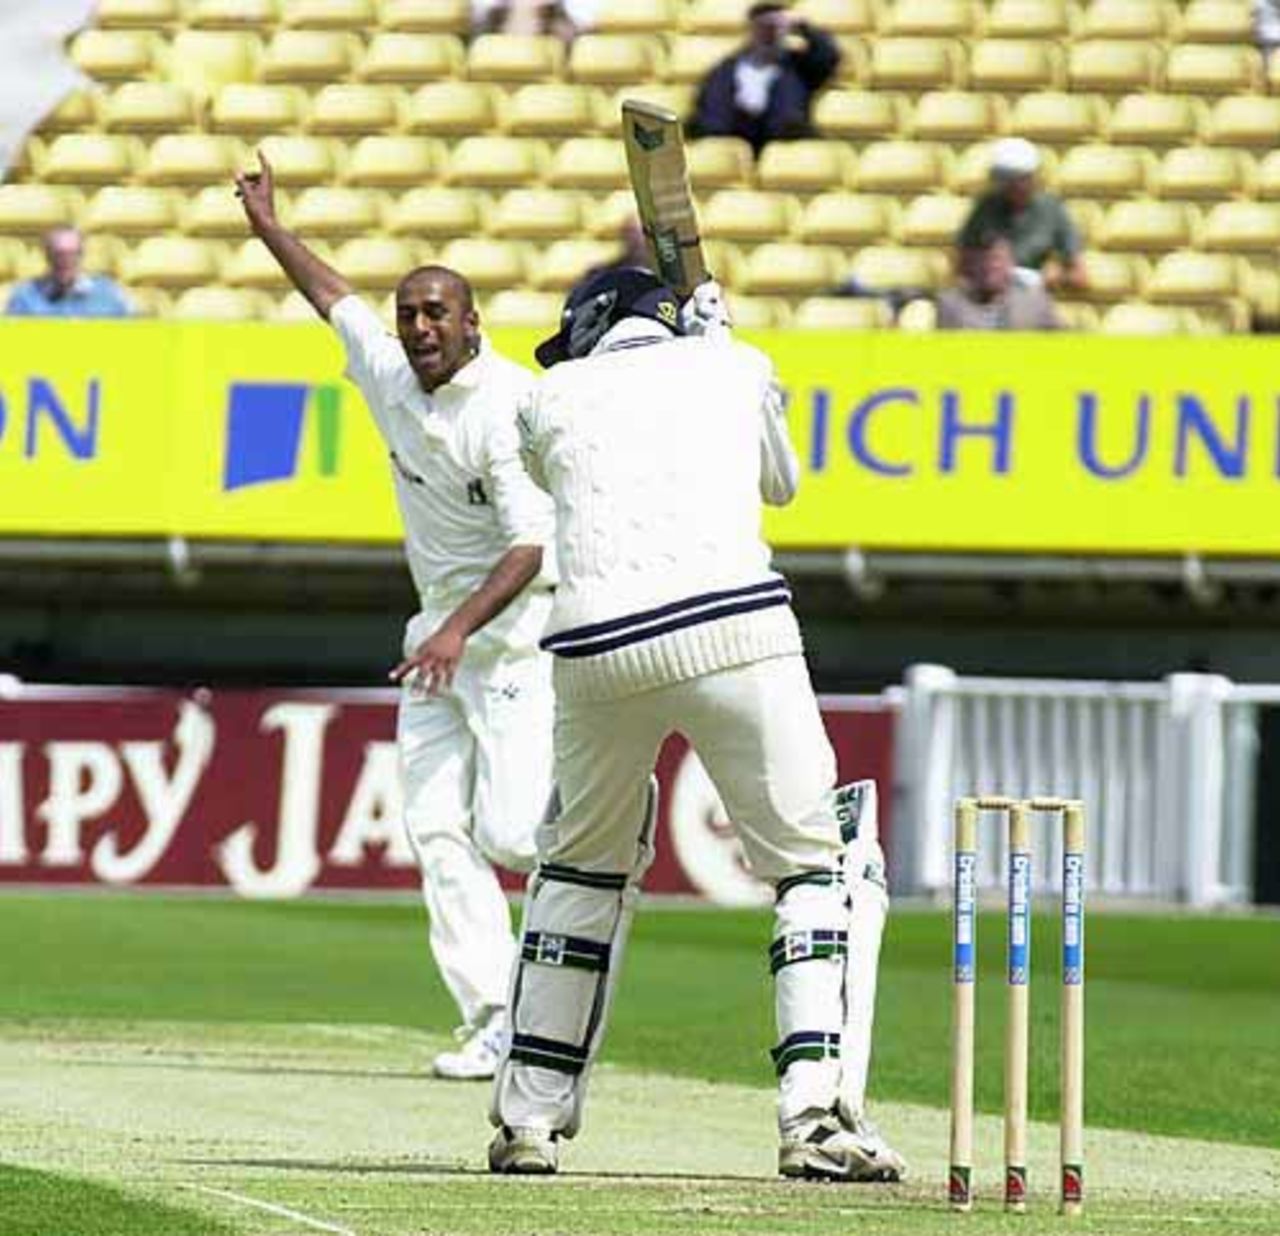 Sheikh of Warks wants the wicket of Fleming lbw, but not out